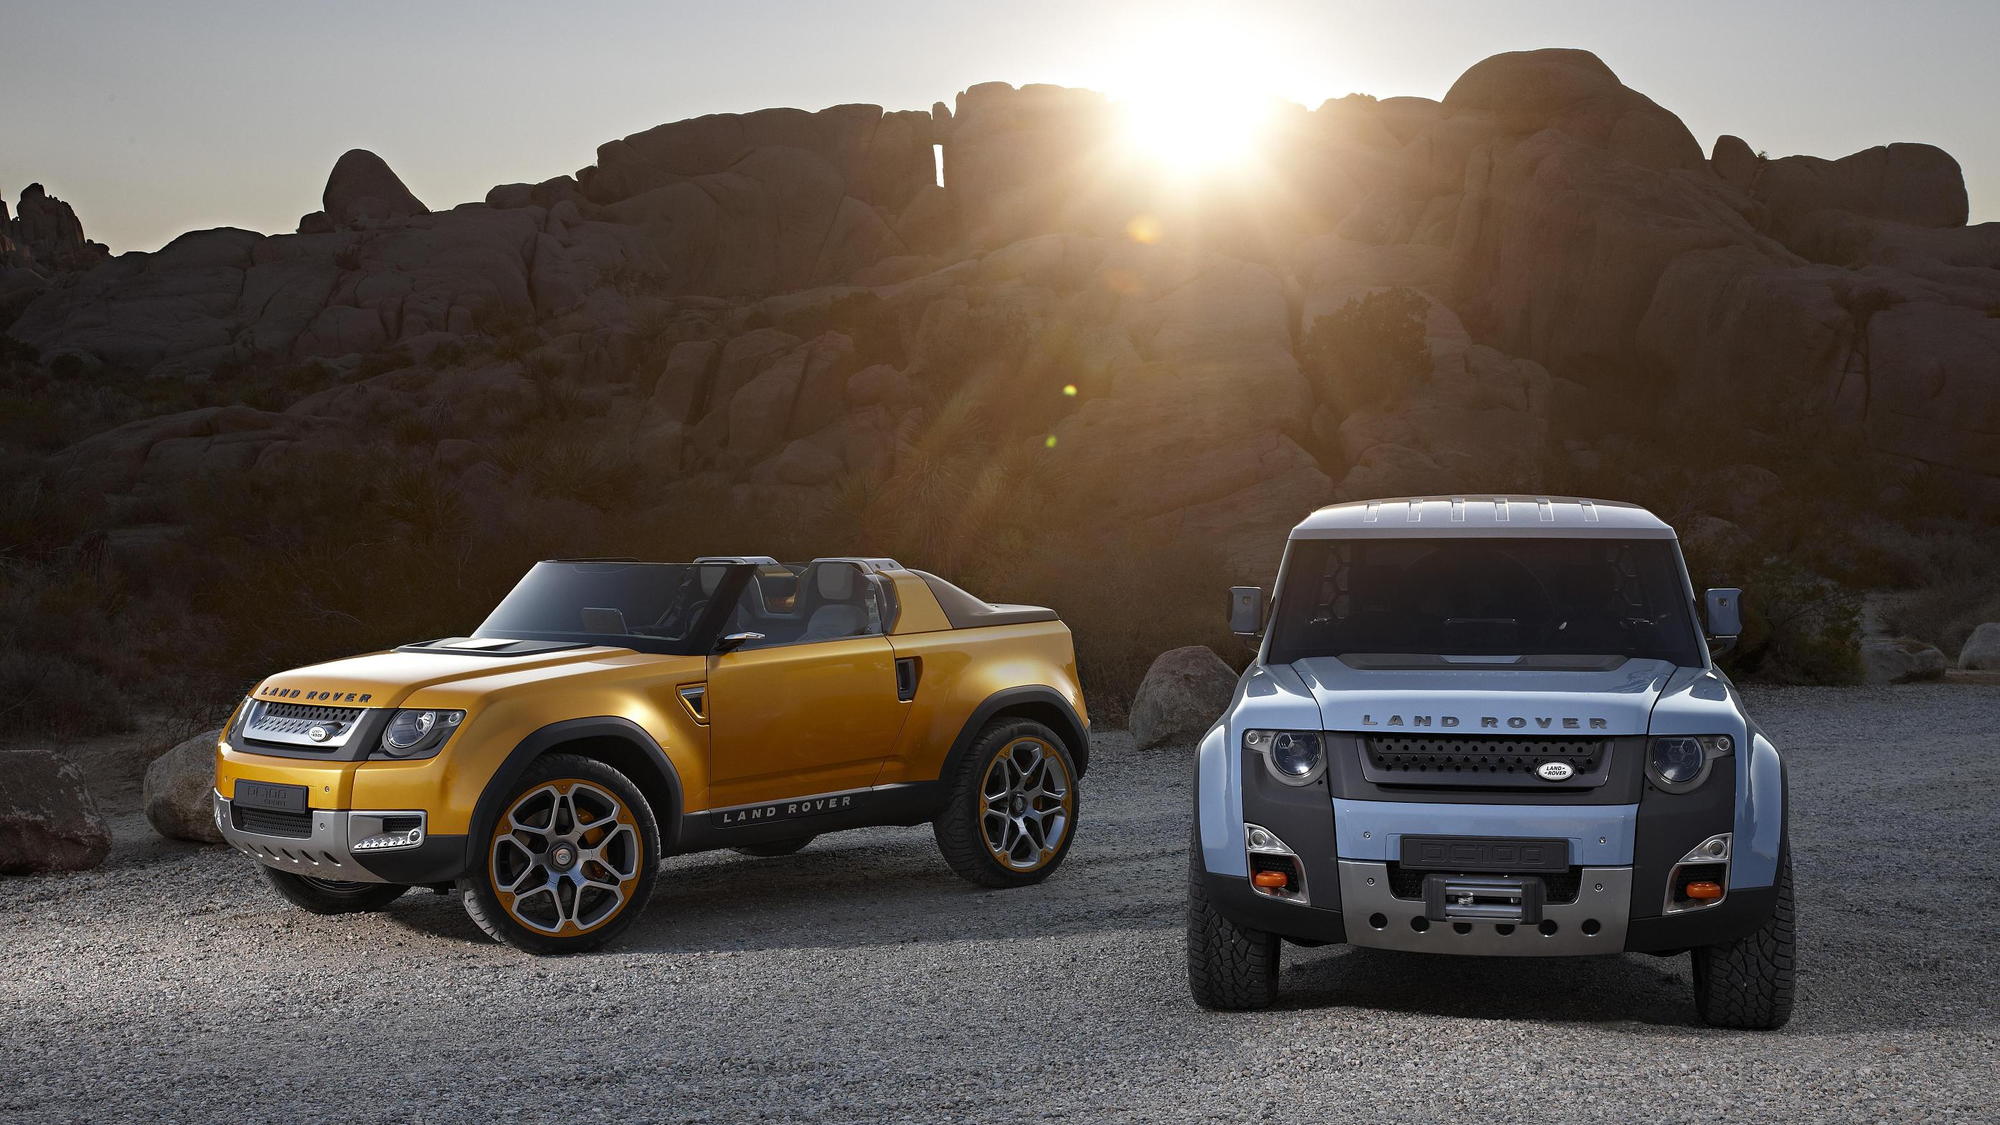 Land Rover's DC100 Sport and DC100 concepts